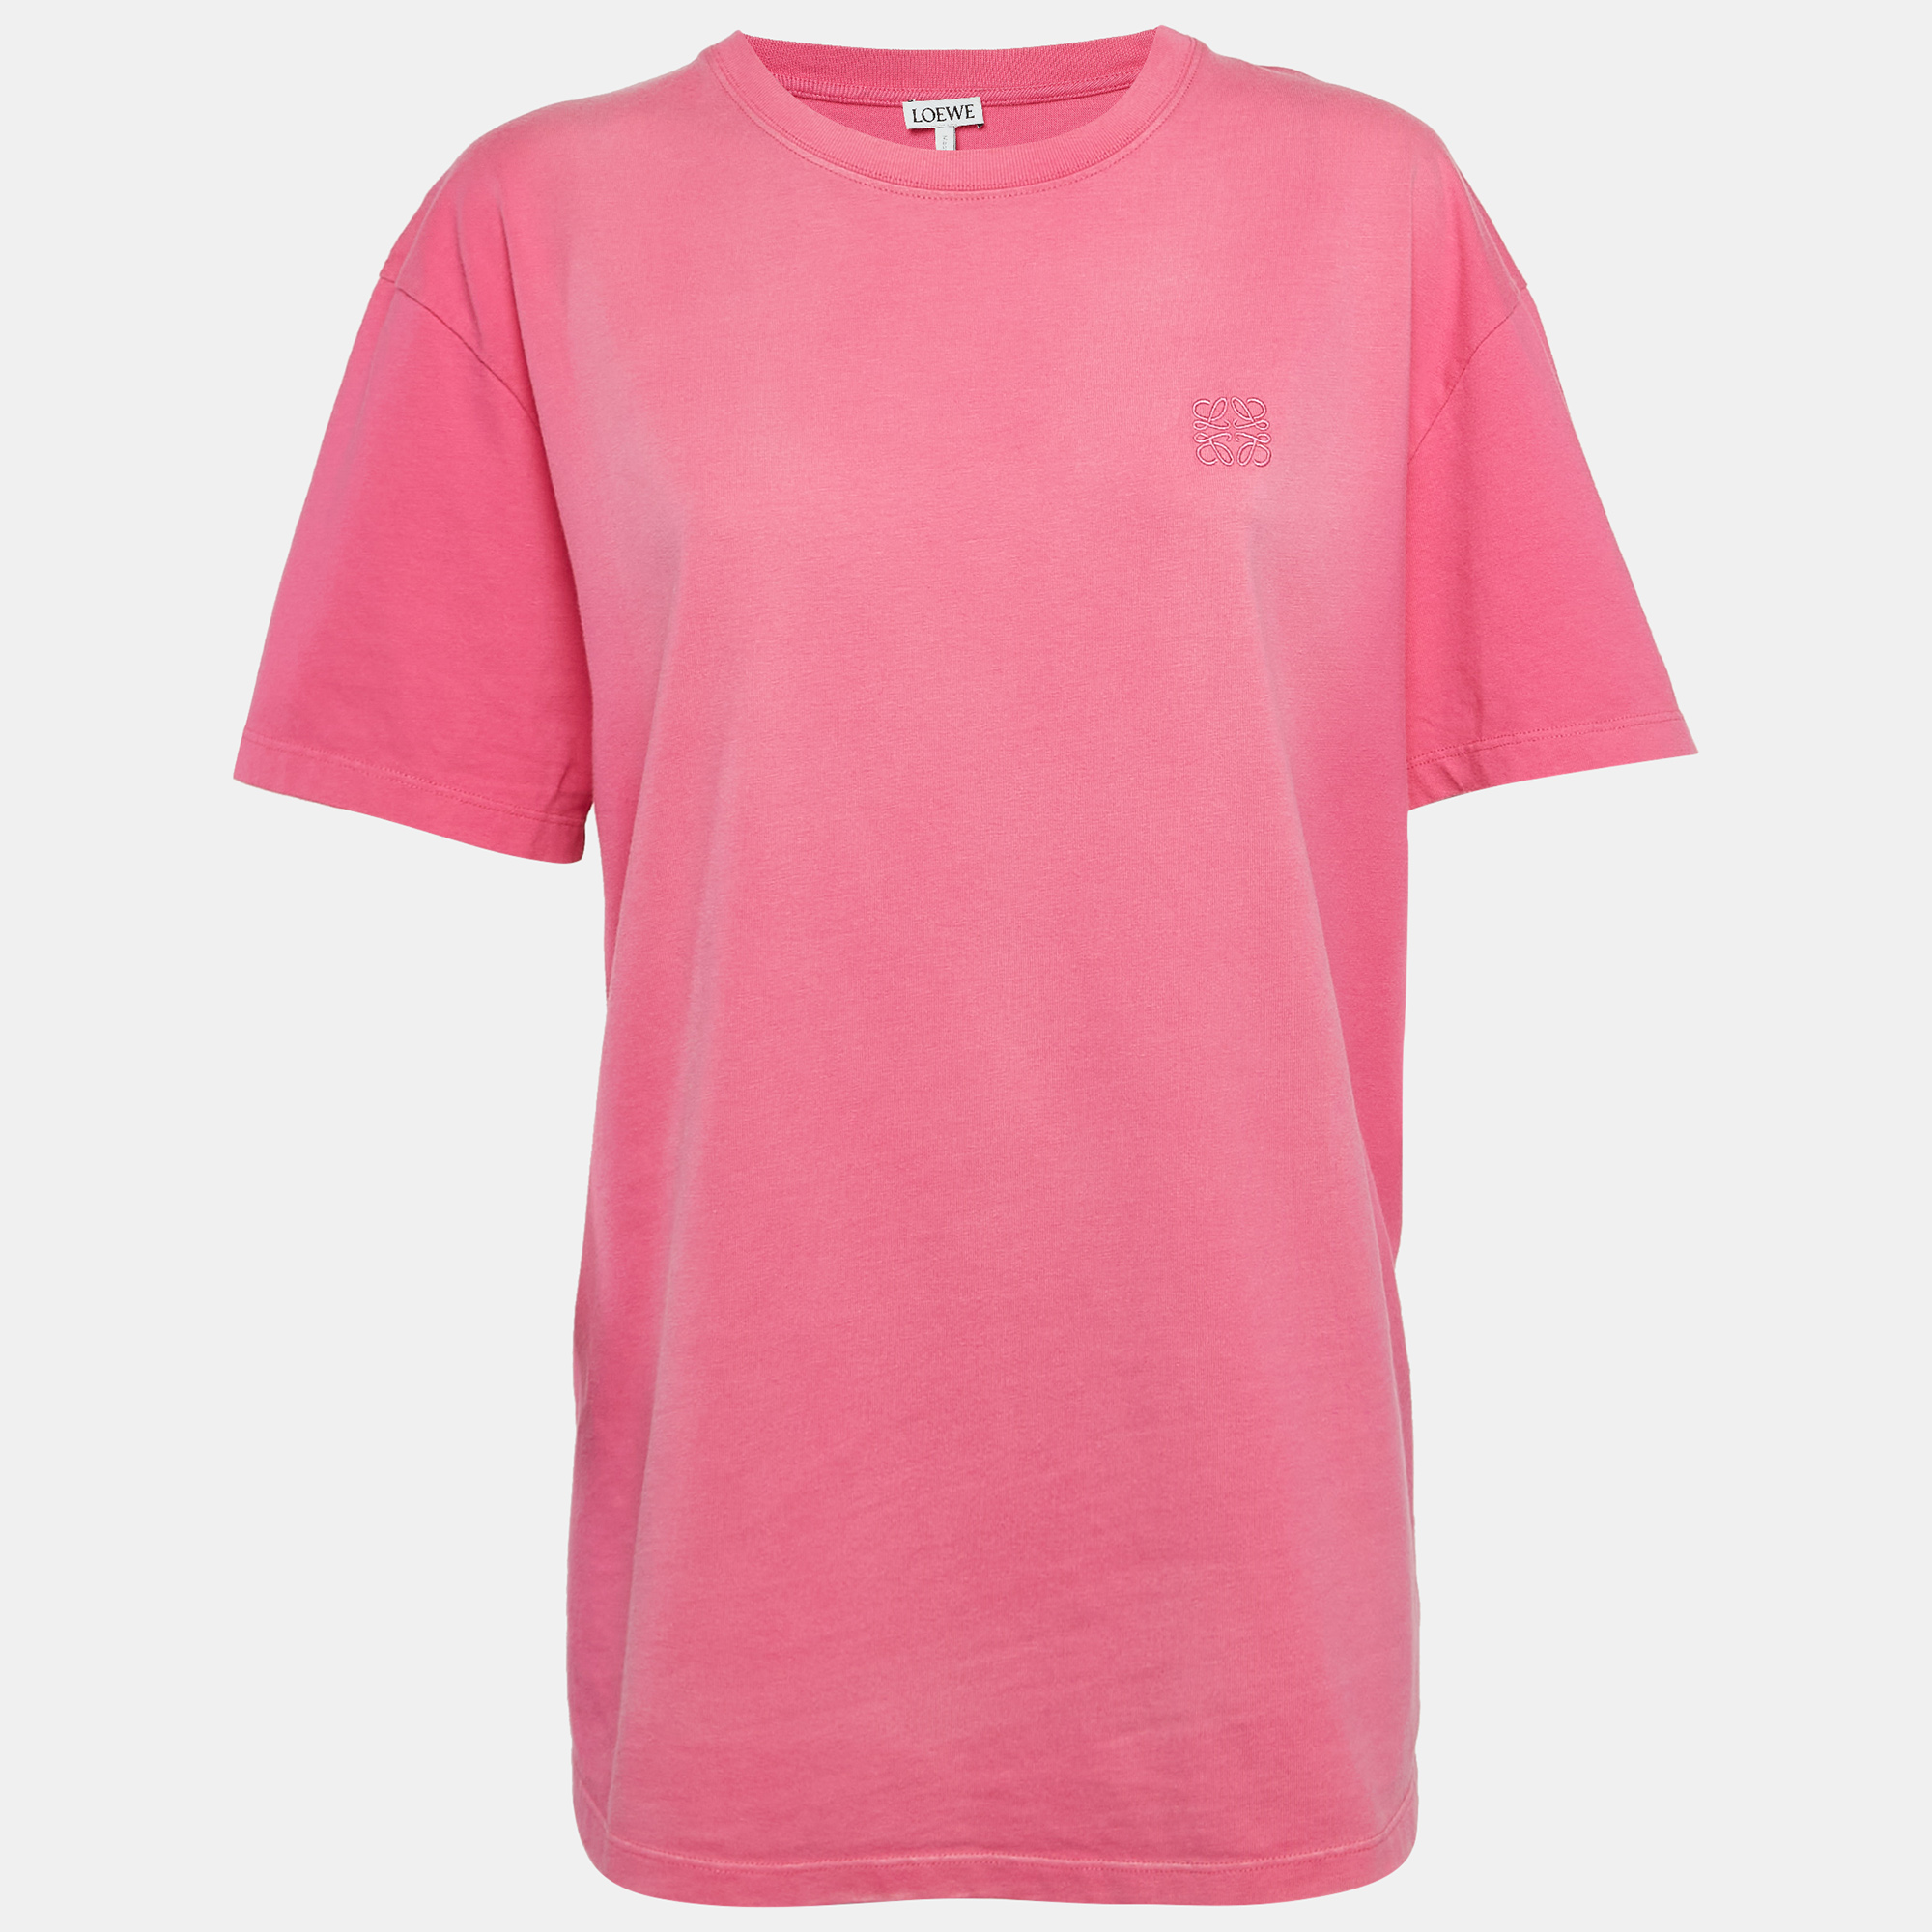 

Loewe Pink Anagram Embroidered Cotton Knit Faded T-Shirt